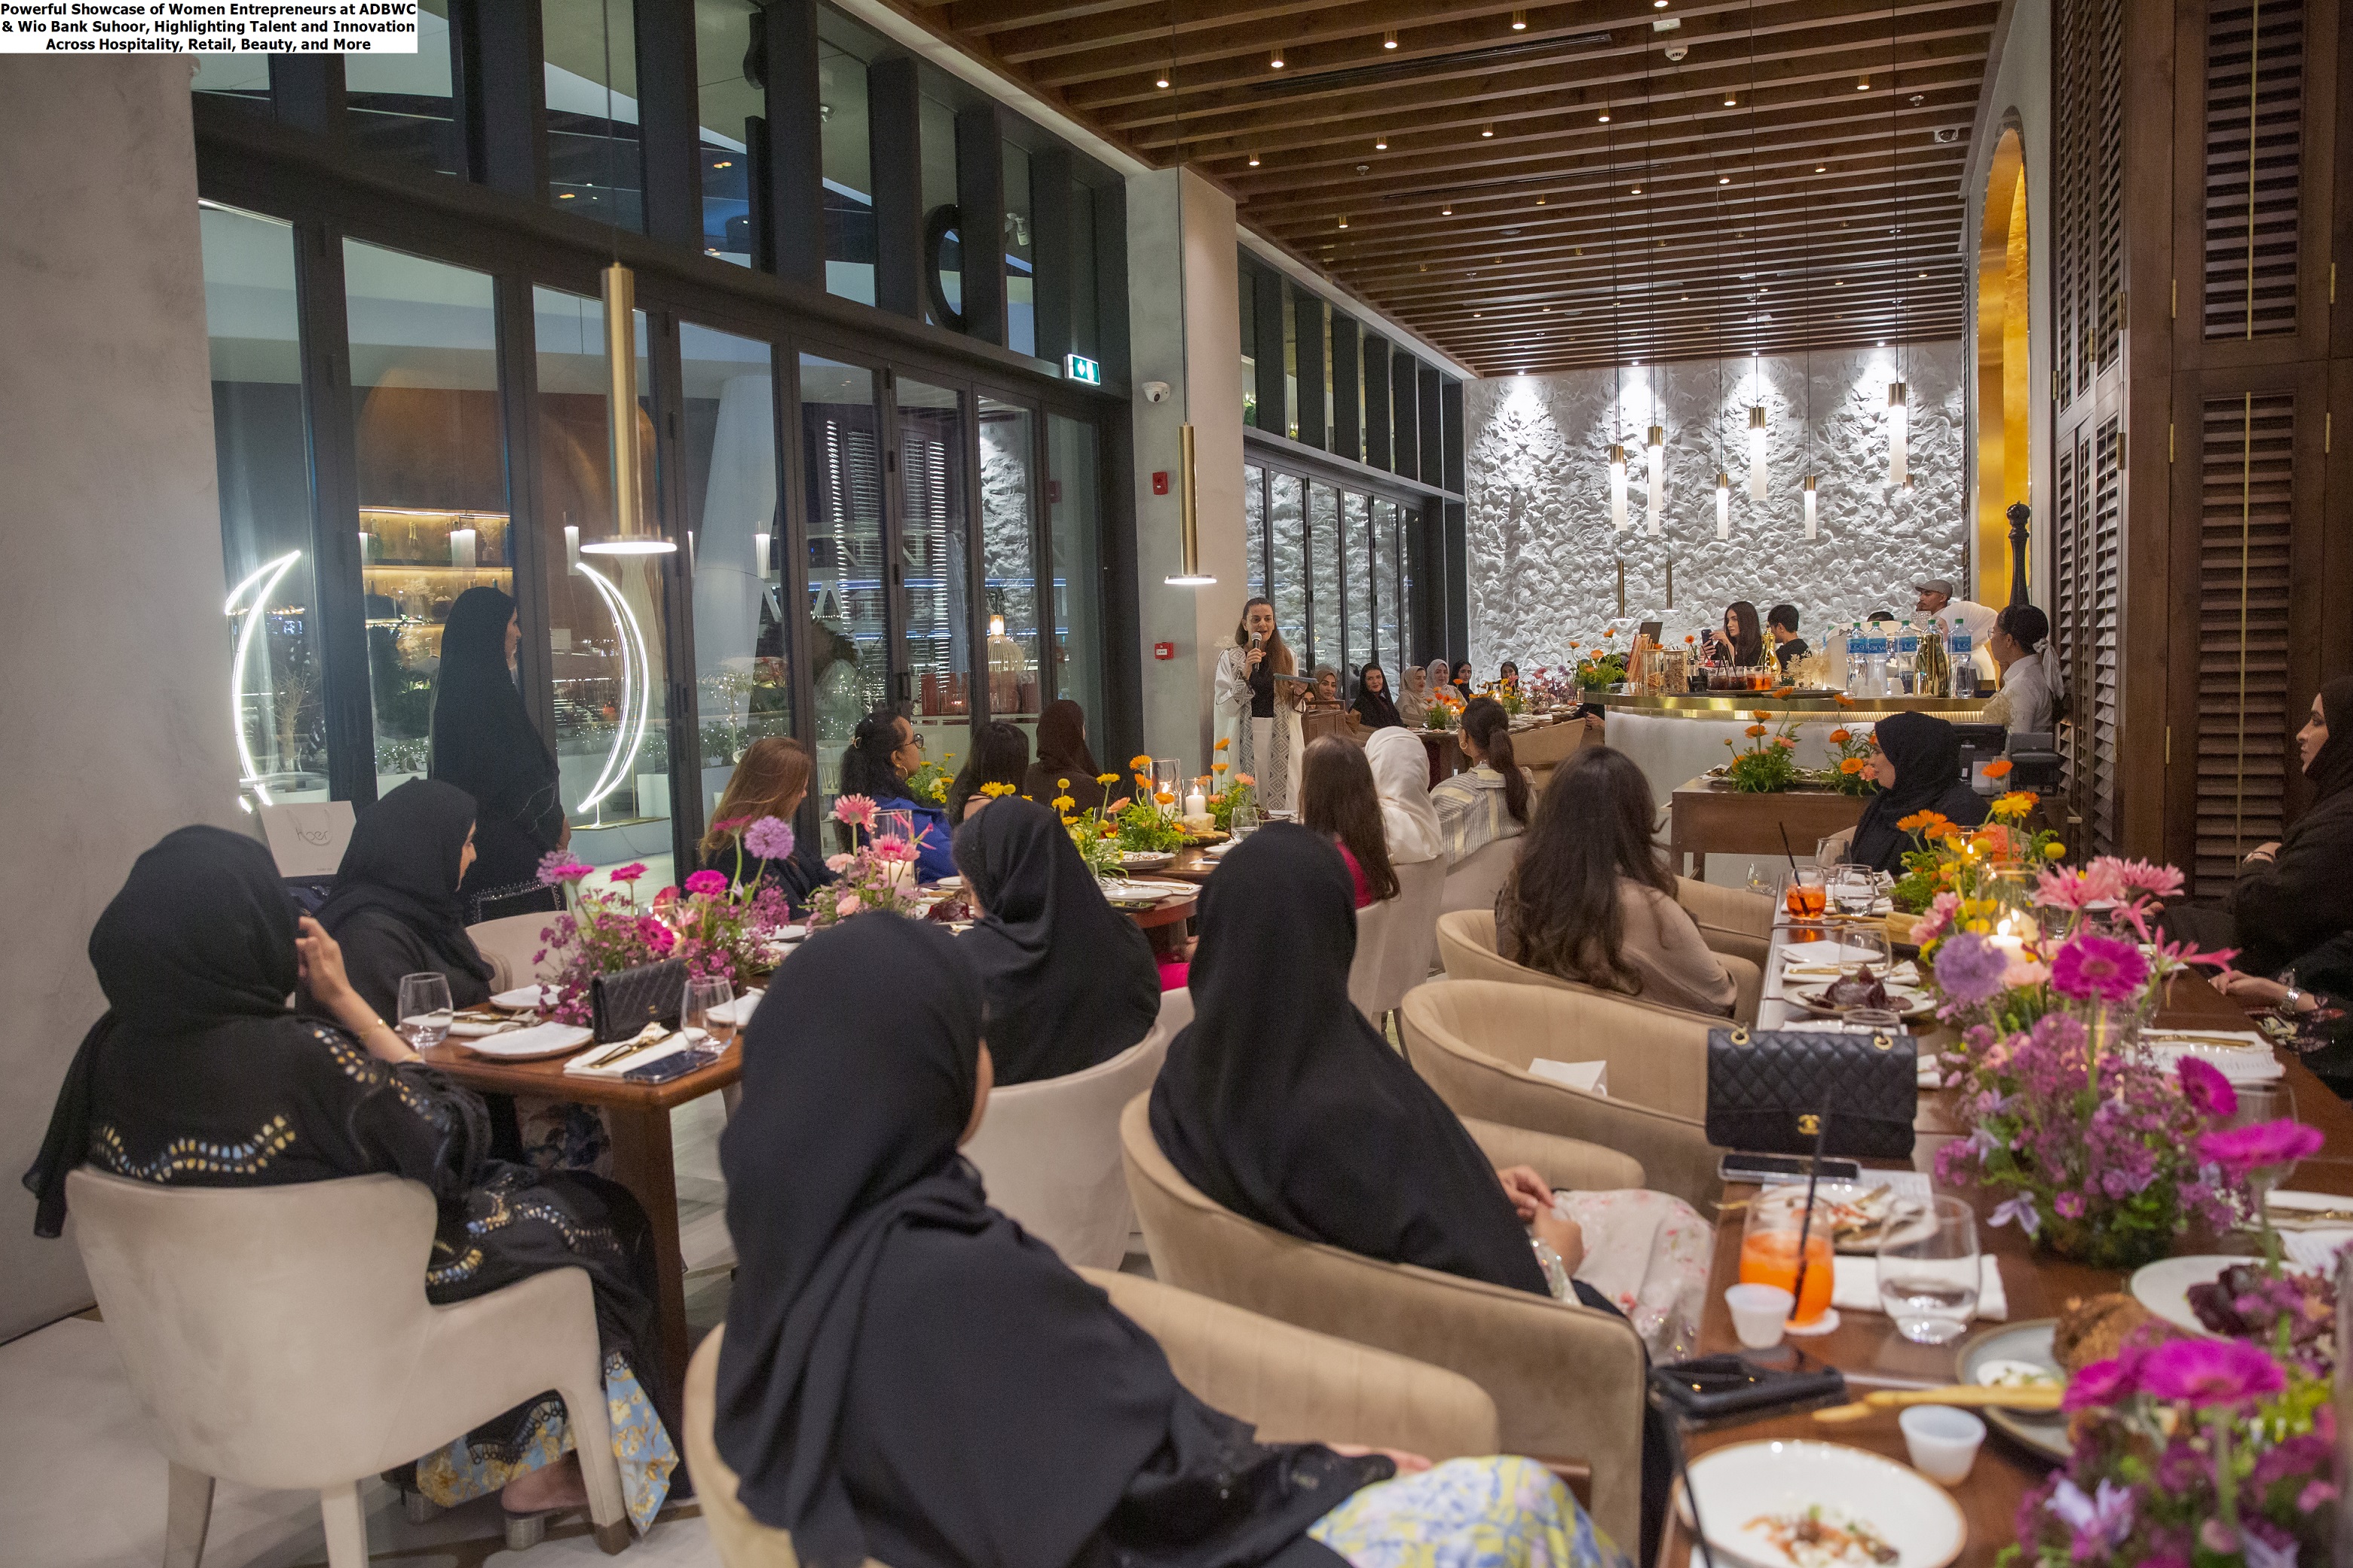 Powerful Showcase Of Women Entrepreneurs At ADBWC & Wio Bank Suhoor, Highlighting Talent And Innovation Across Hospitality, Retail, Beauty, And More